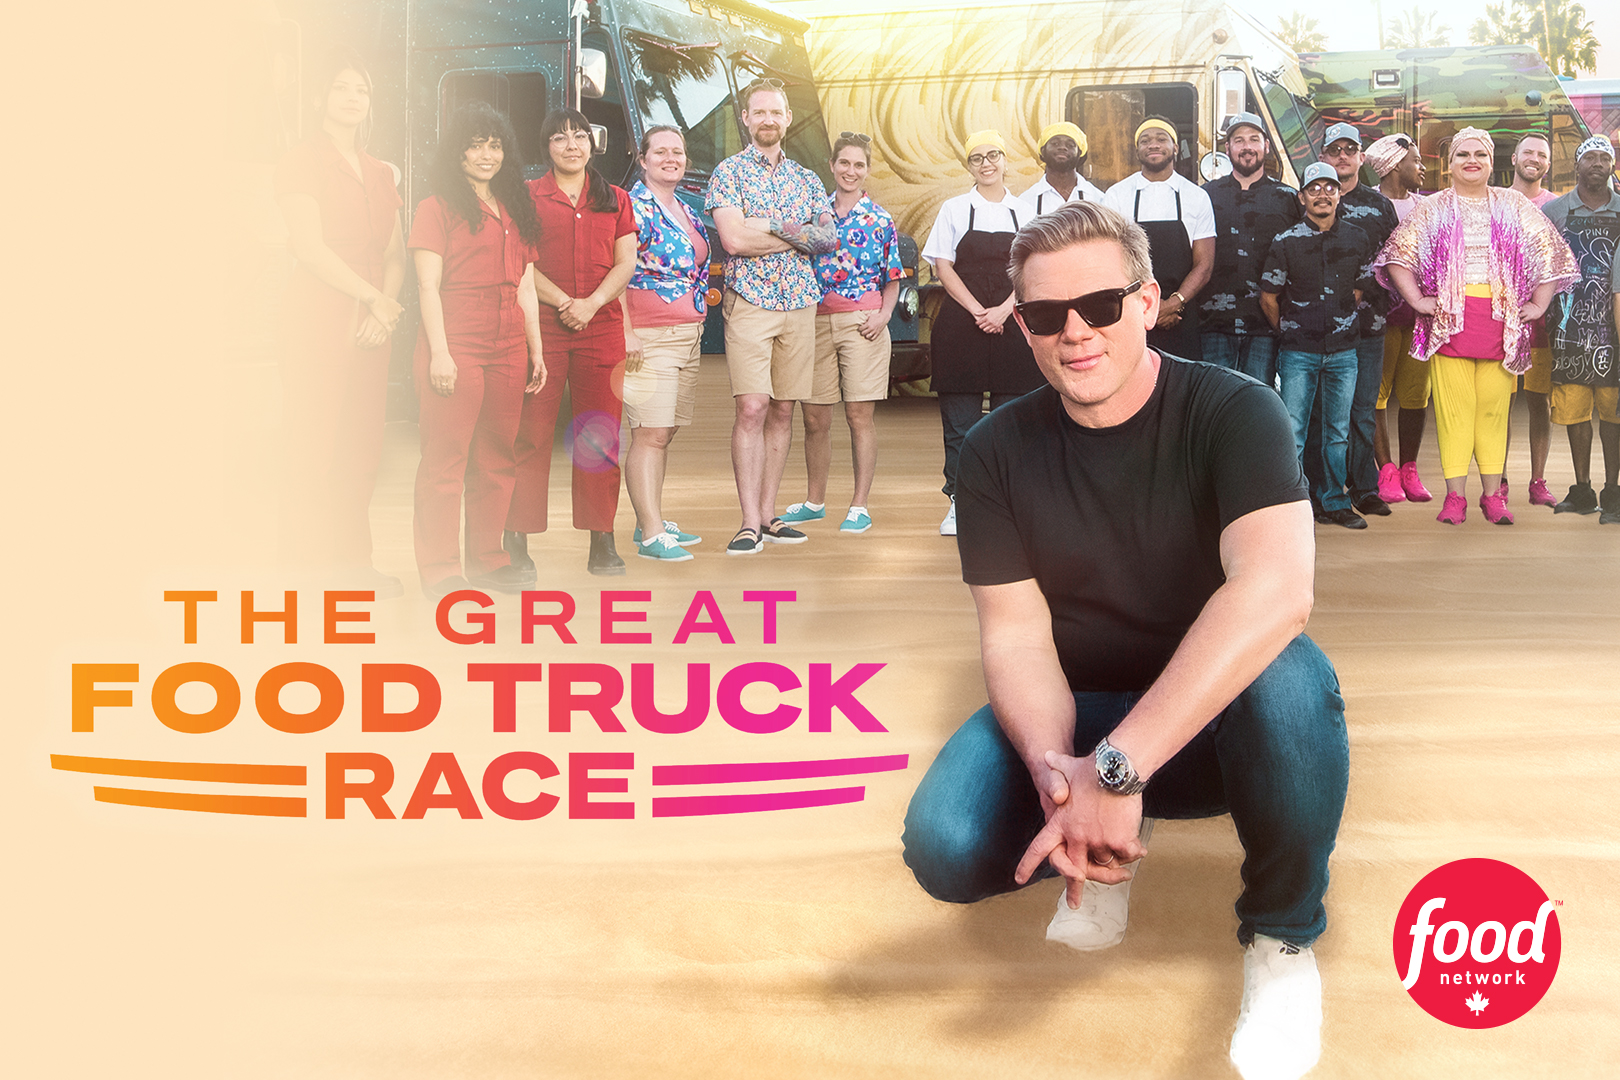 The Great Food Truck Race – All New Sunday 9ep